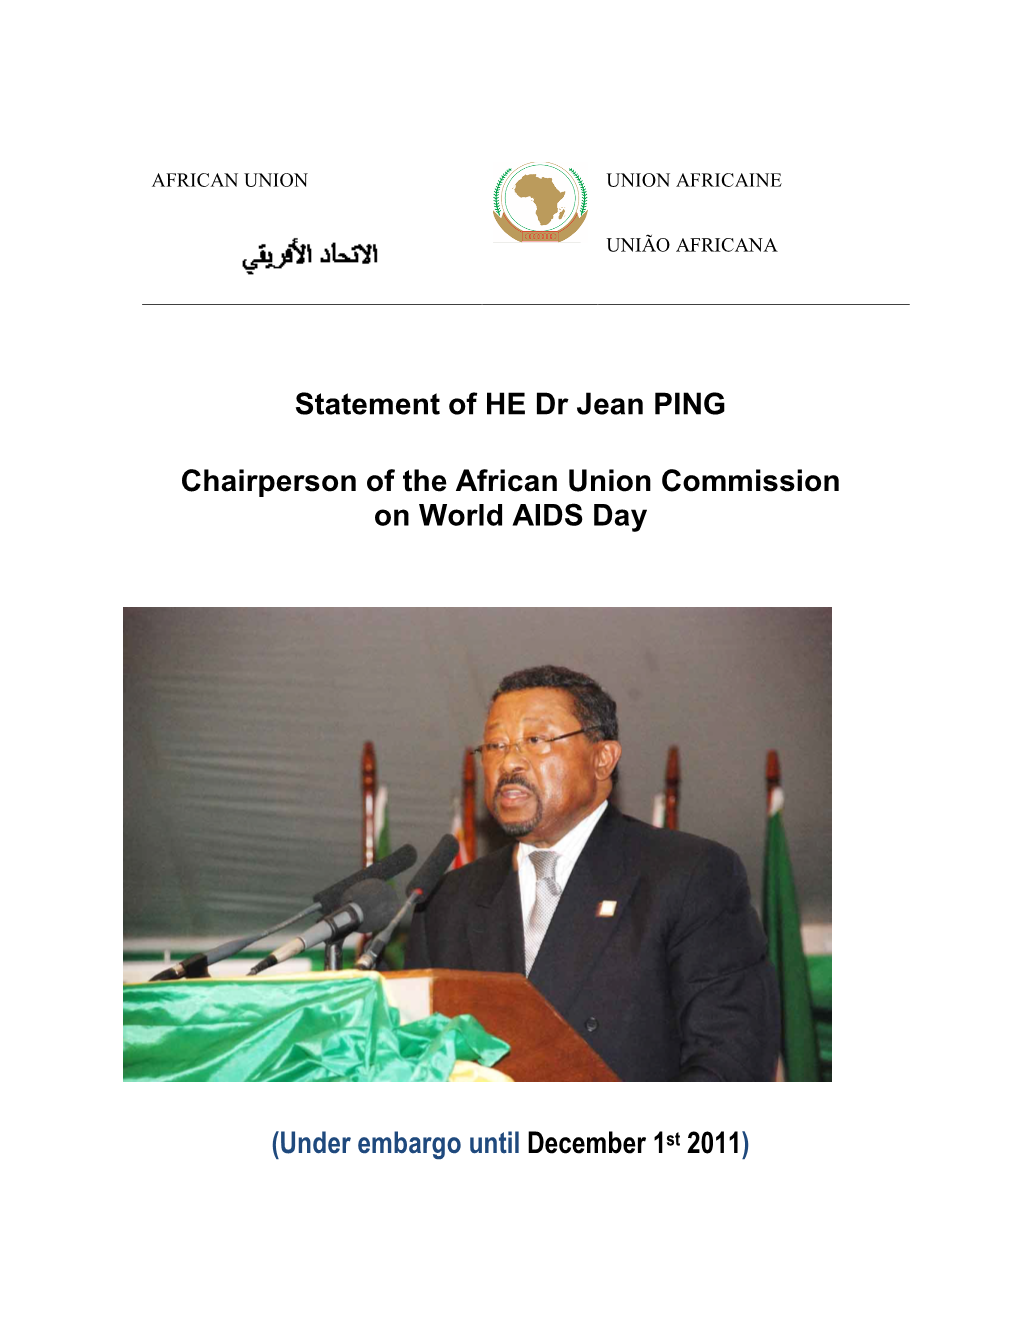 Statement of HE Dr Jean PING Chairperson of The